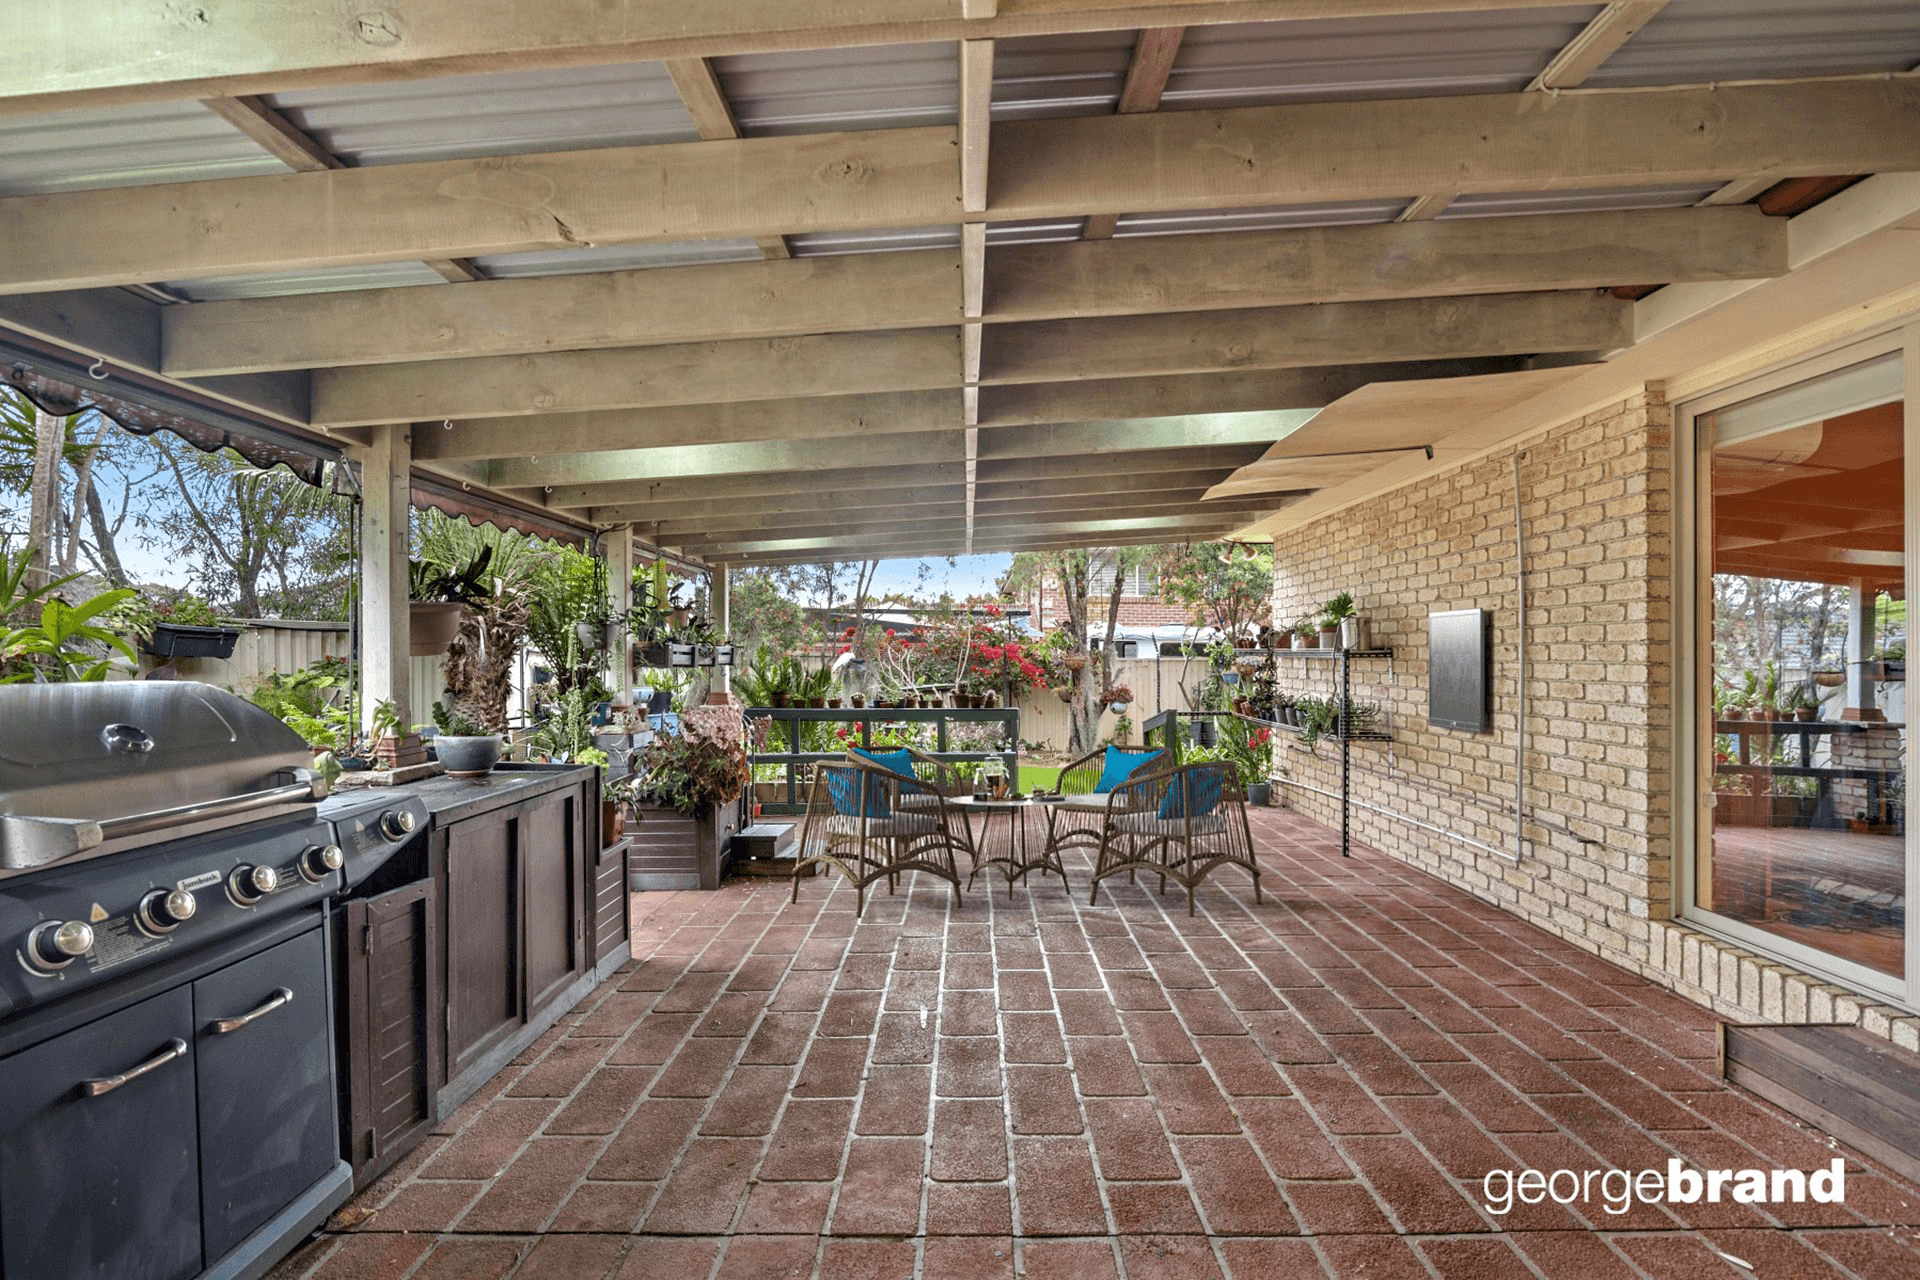 17 Brittany Crescent, Kariong, NSW 2250